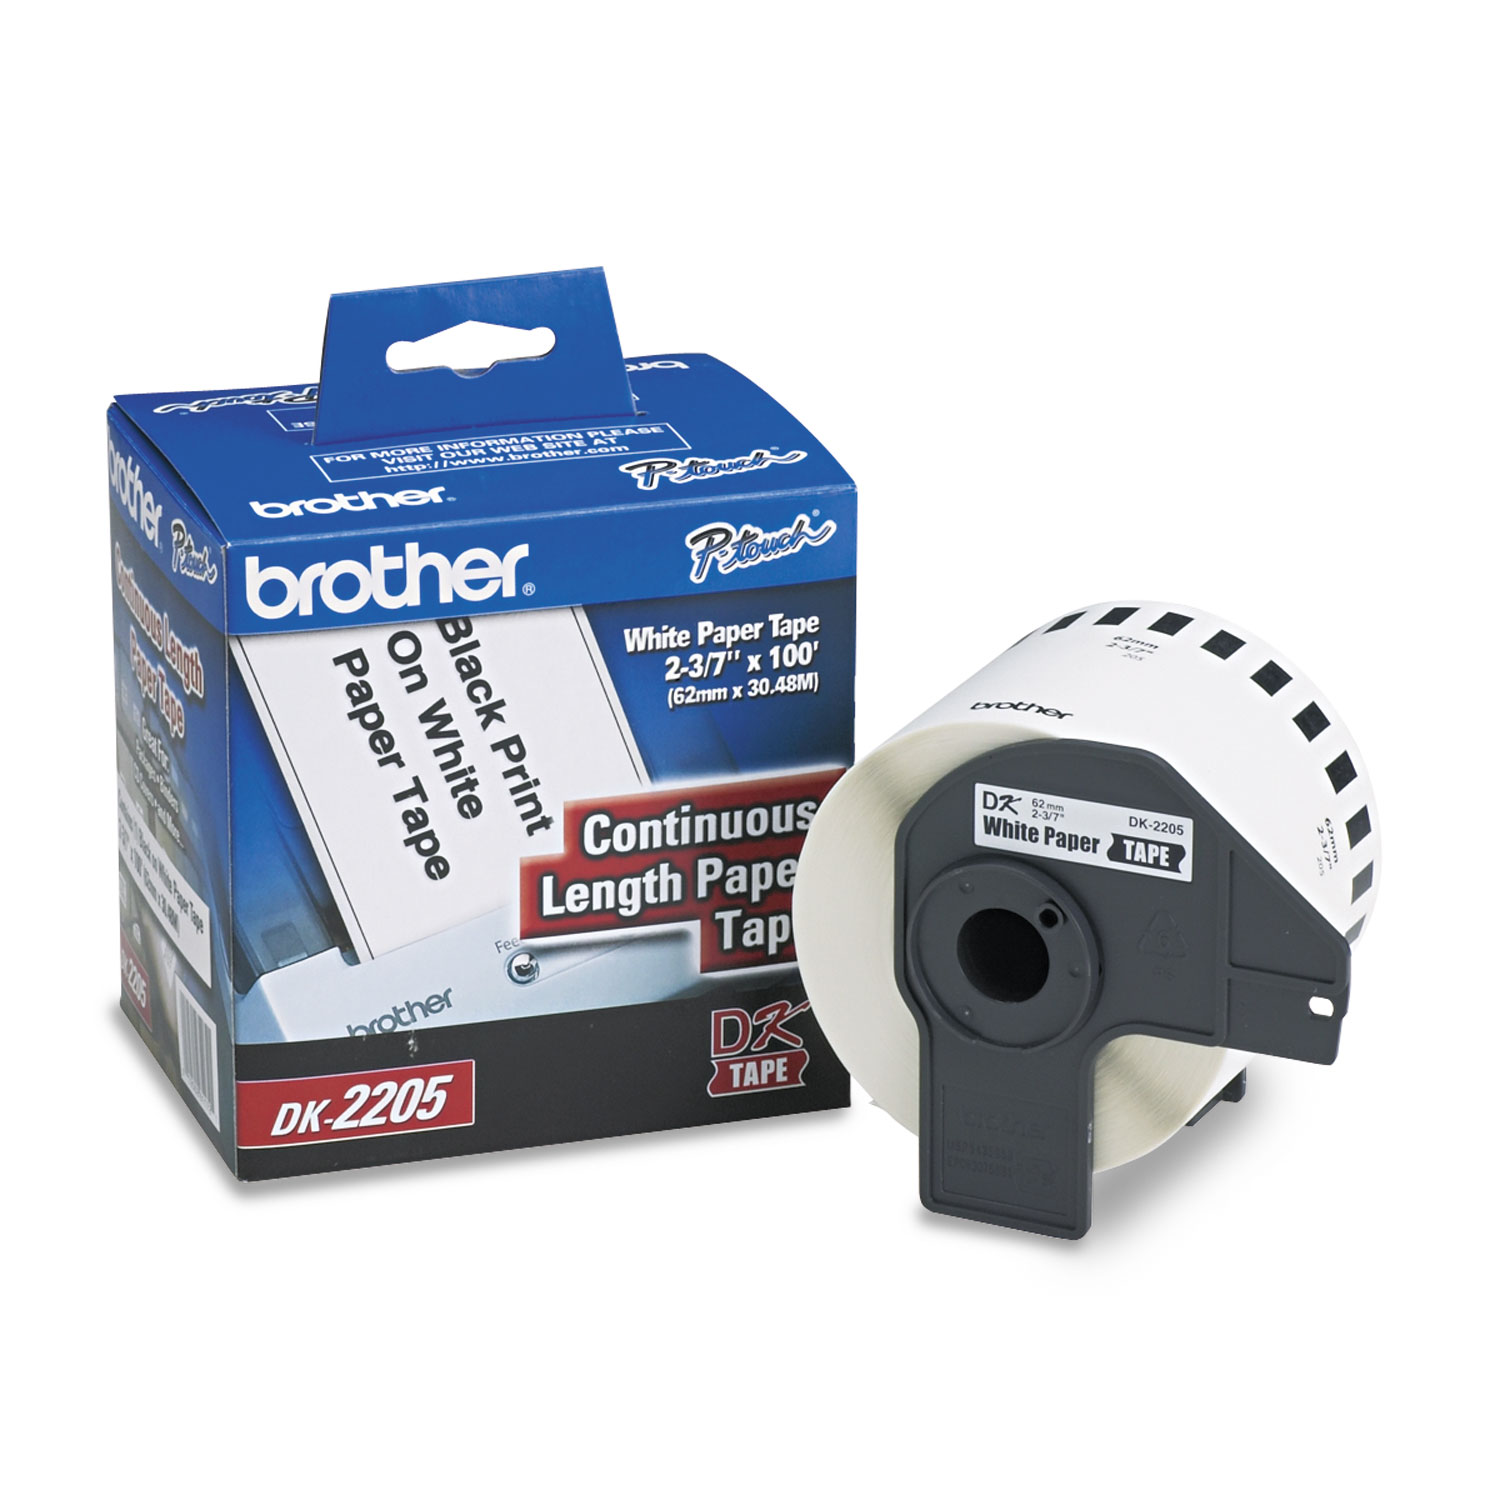  Brother DK2205 Continuous Paper Label Tape, 2.4 x 100 ft Roll, White (BRTDK2205) 